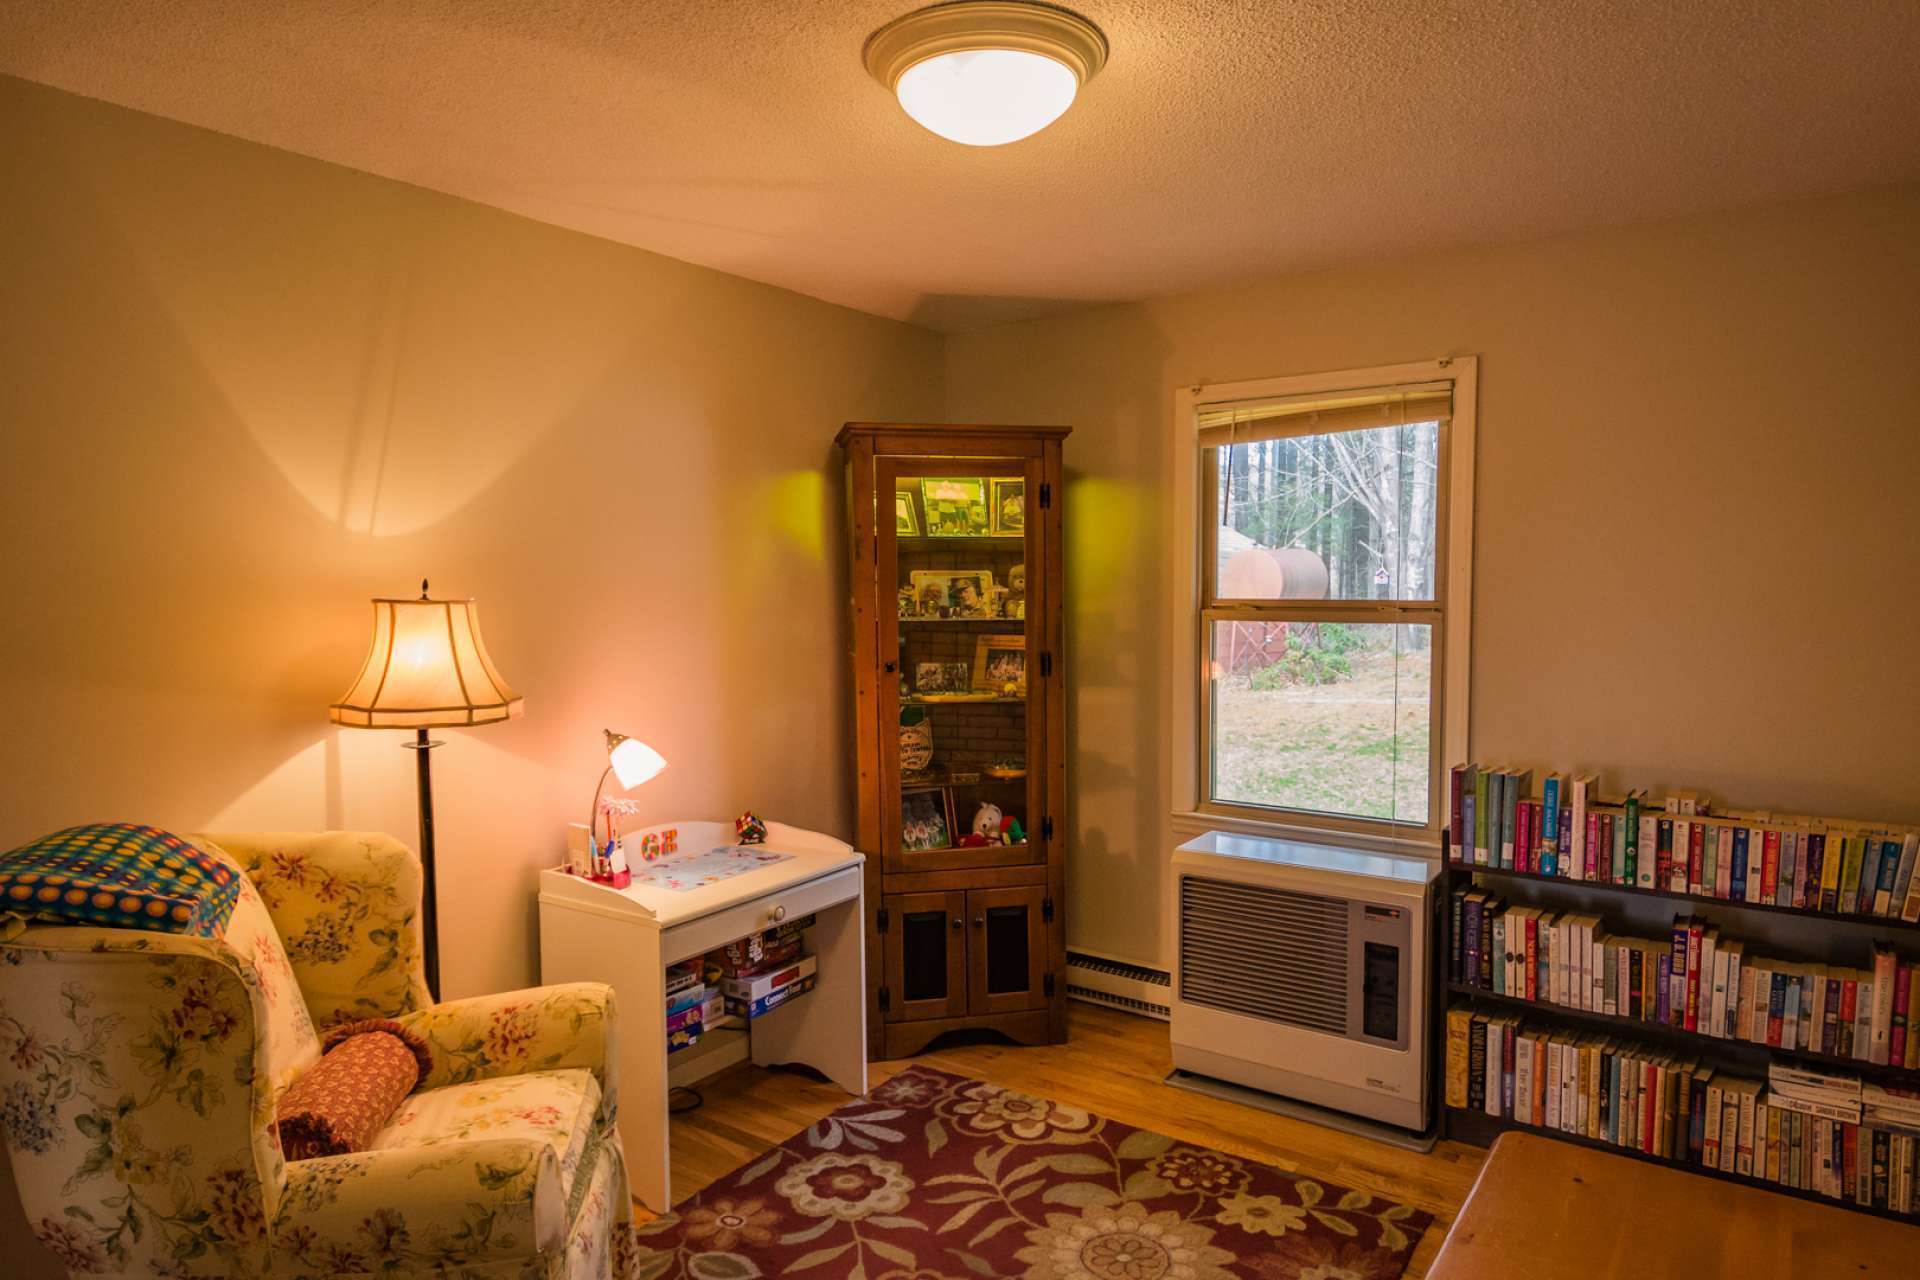 The den area offers a relaxing place to spend time with family and friends, or expand the entertaining space.